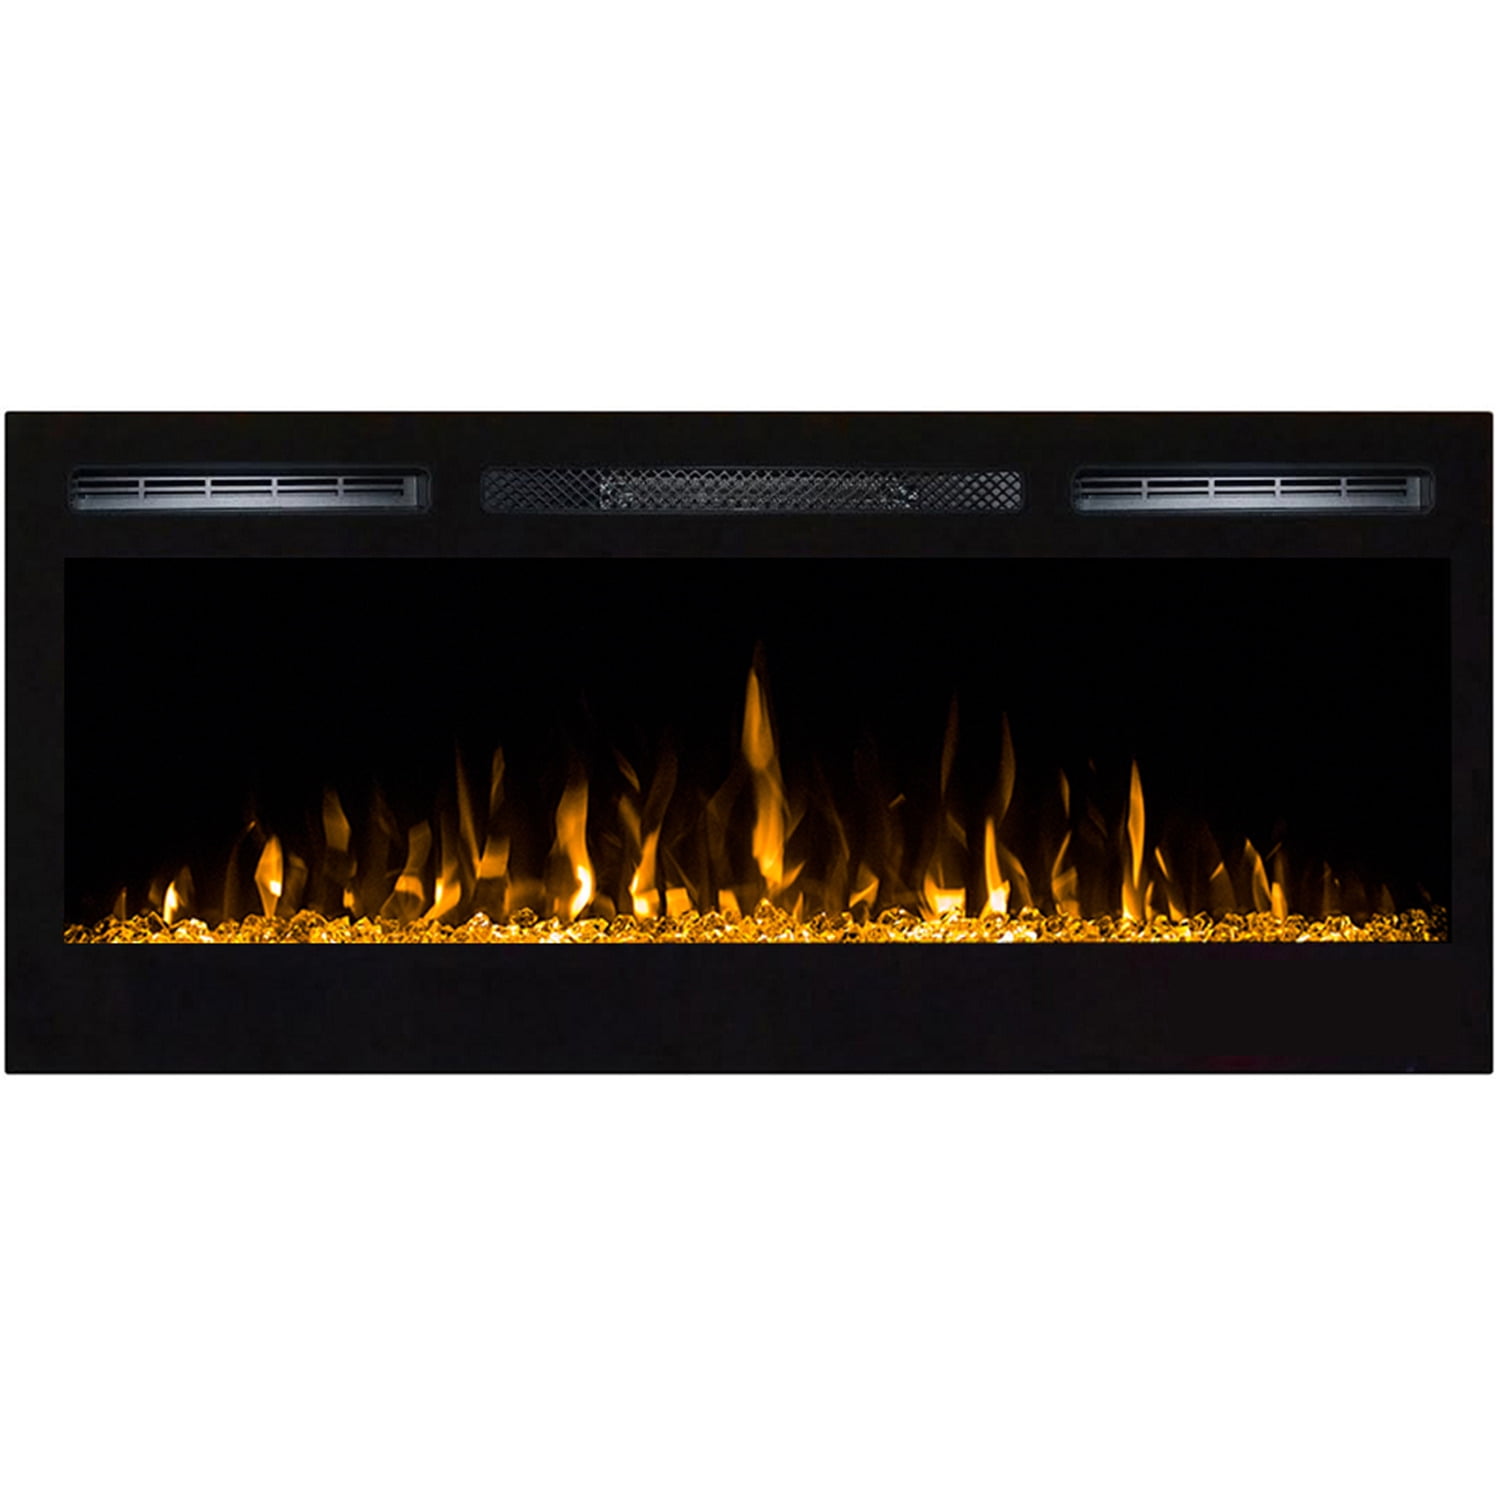 Regal Flame Lexington 35" Crystal Built in Wall Ventless Heater Recessed Wall Mounted Electric Fireplace Better than Wood Firepl